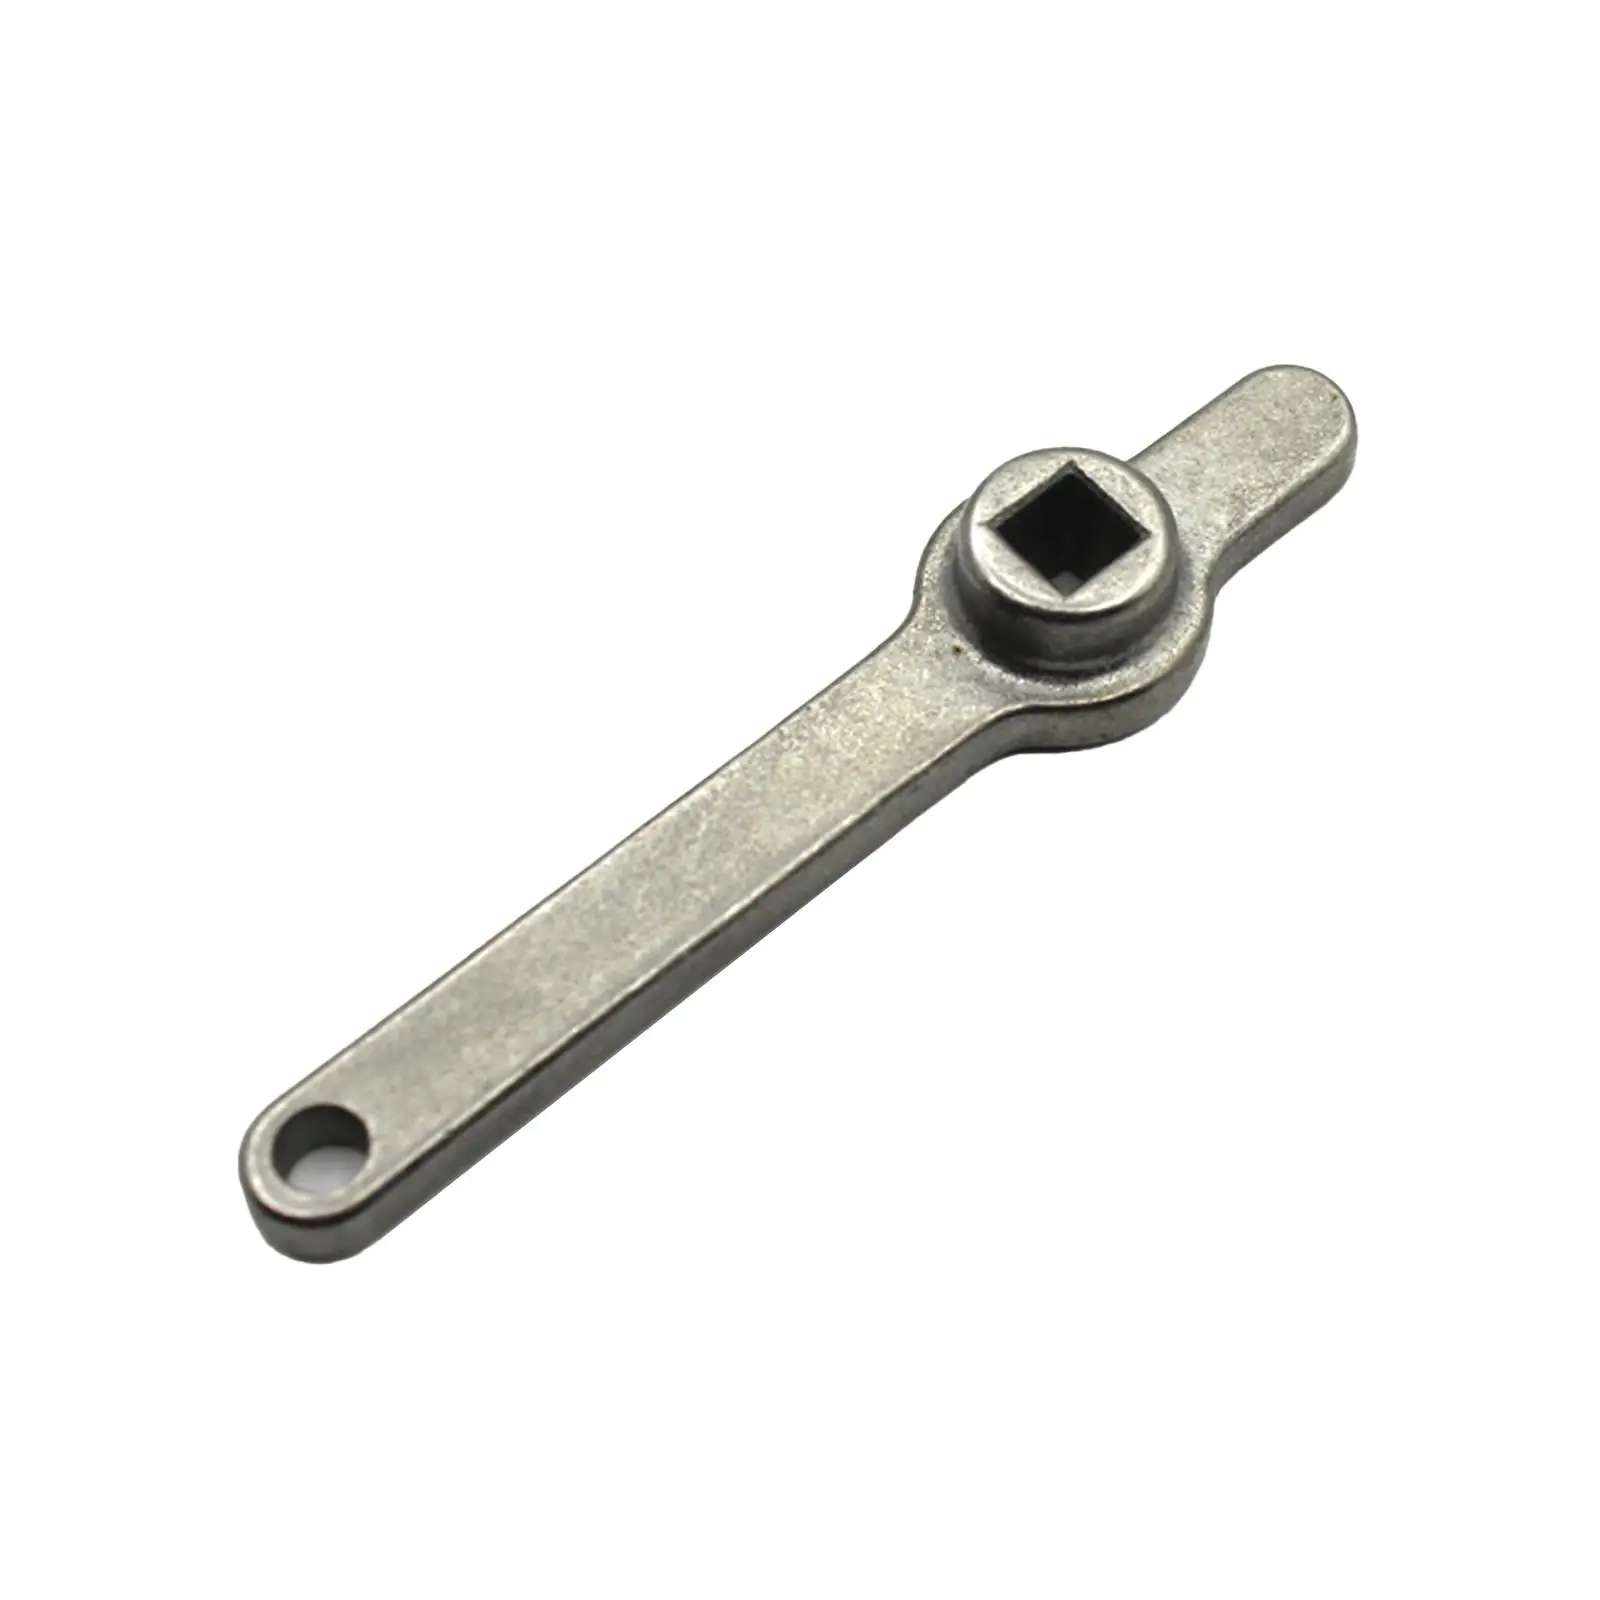 Air Outlet Wrench Practical Durable Professional Stainless Universal Humidifier Ventilation Handle Plumbing Tool Radiator Key